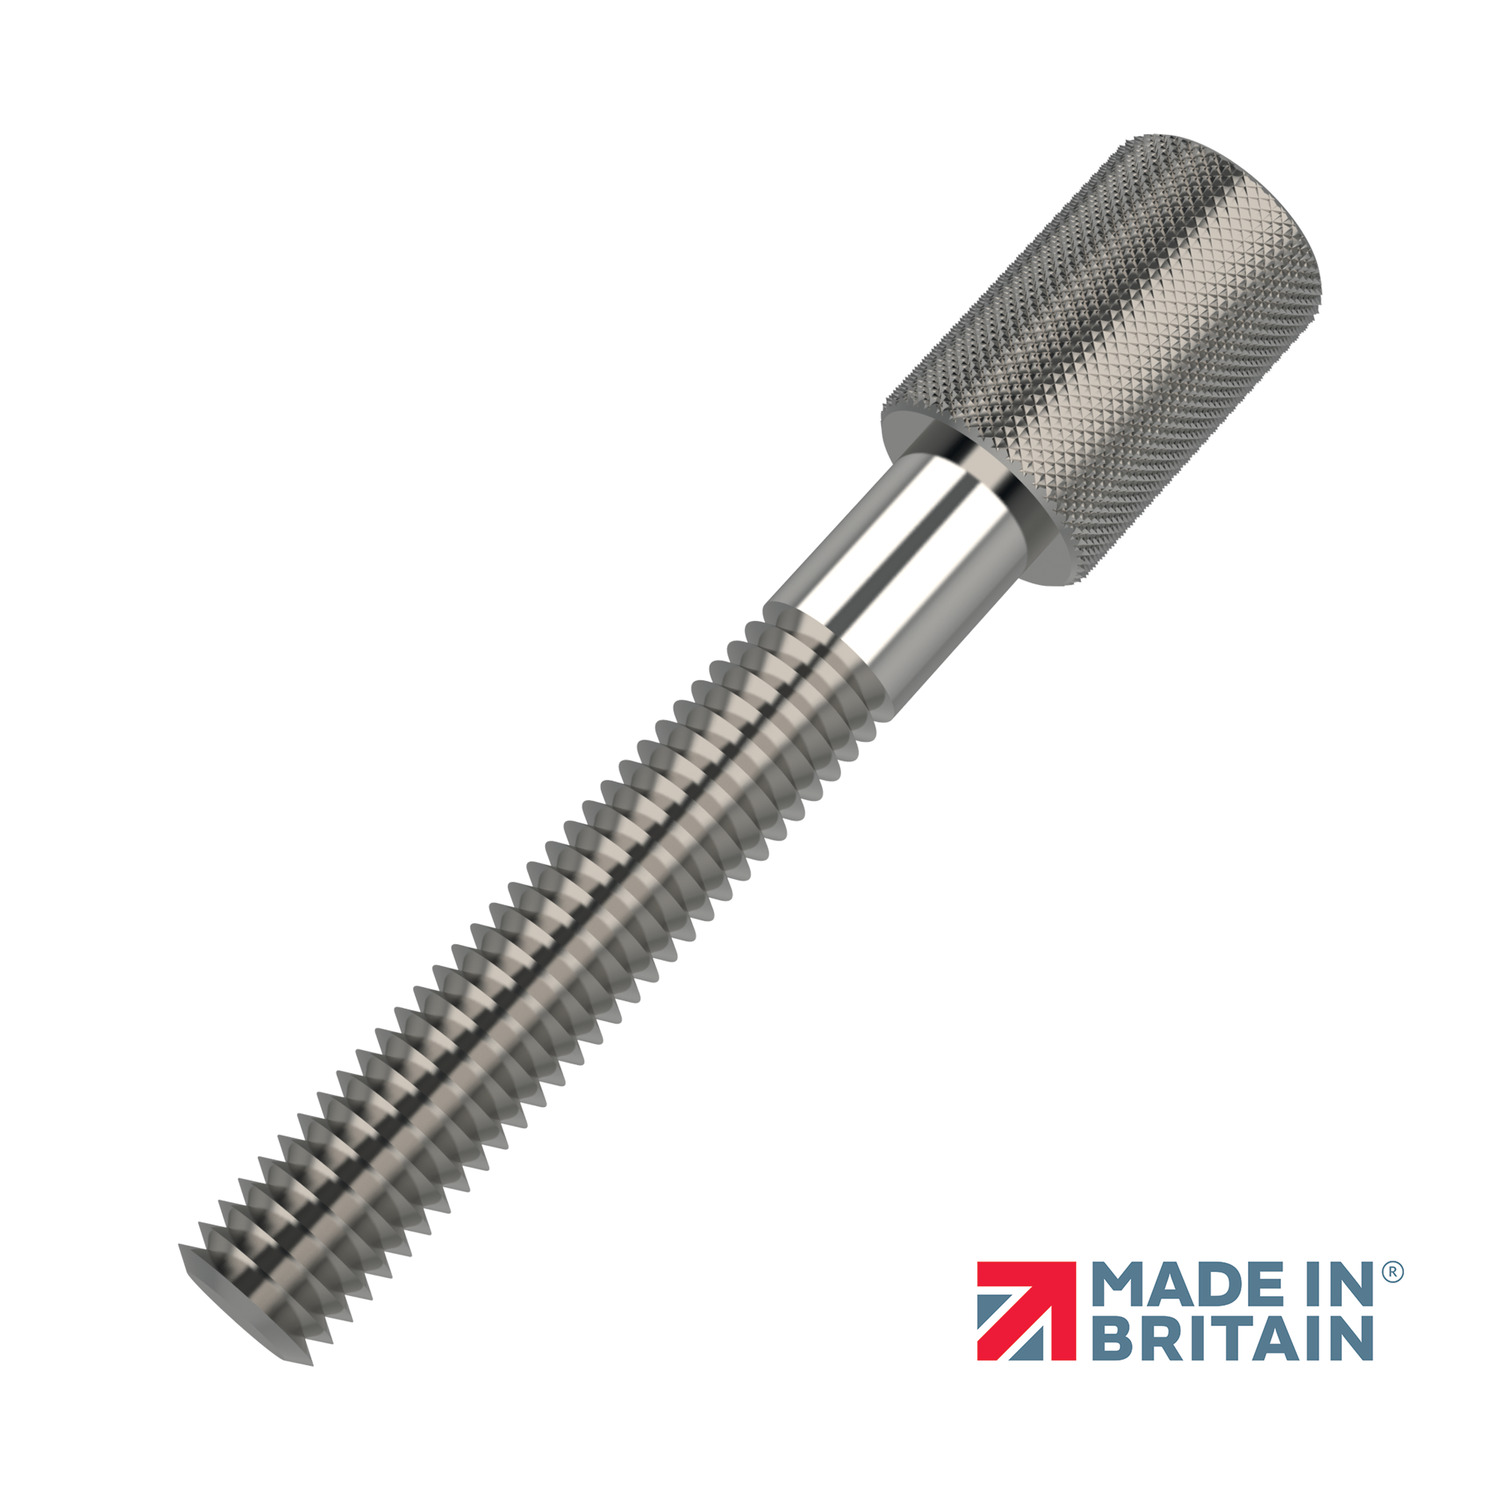 P0435.03-06-12-A4 Thin head thumb screw - M 3x12 Stainless steel 316